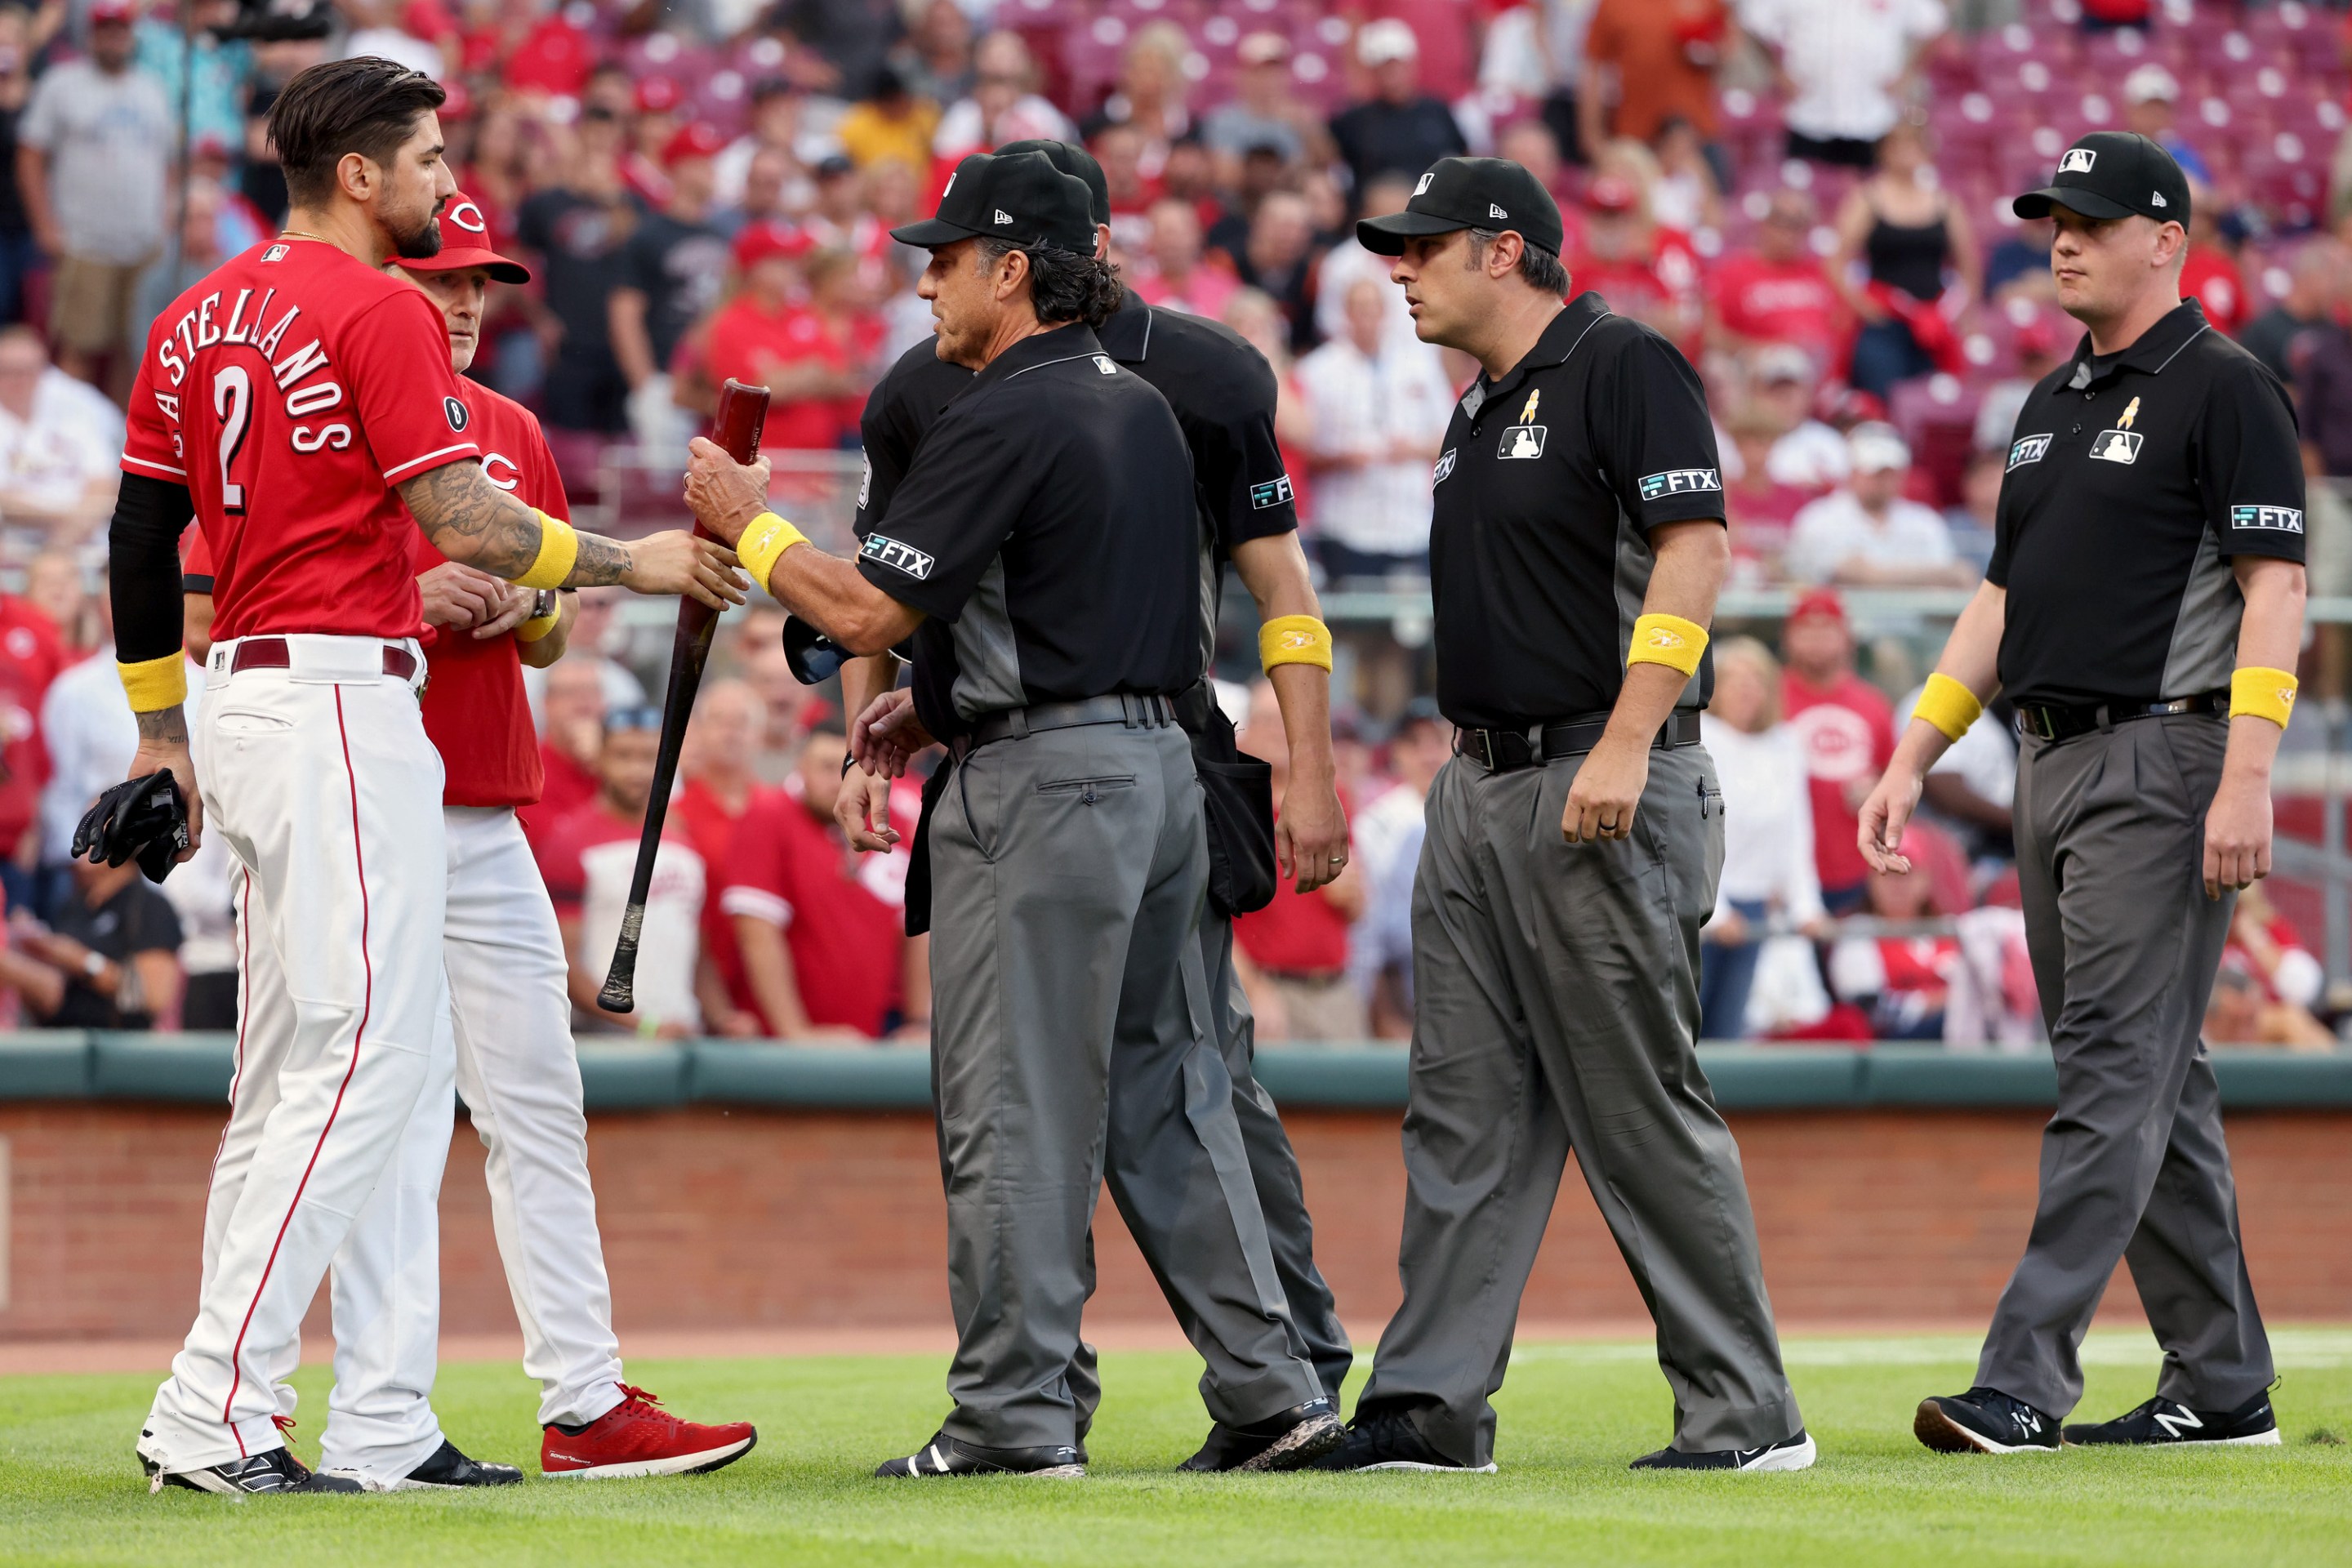 Umpires check the bat of Nick Castellanos after he destroys the St.Louis Cardinals.